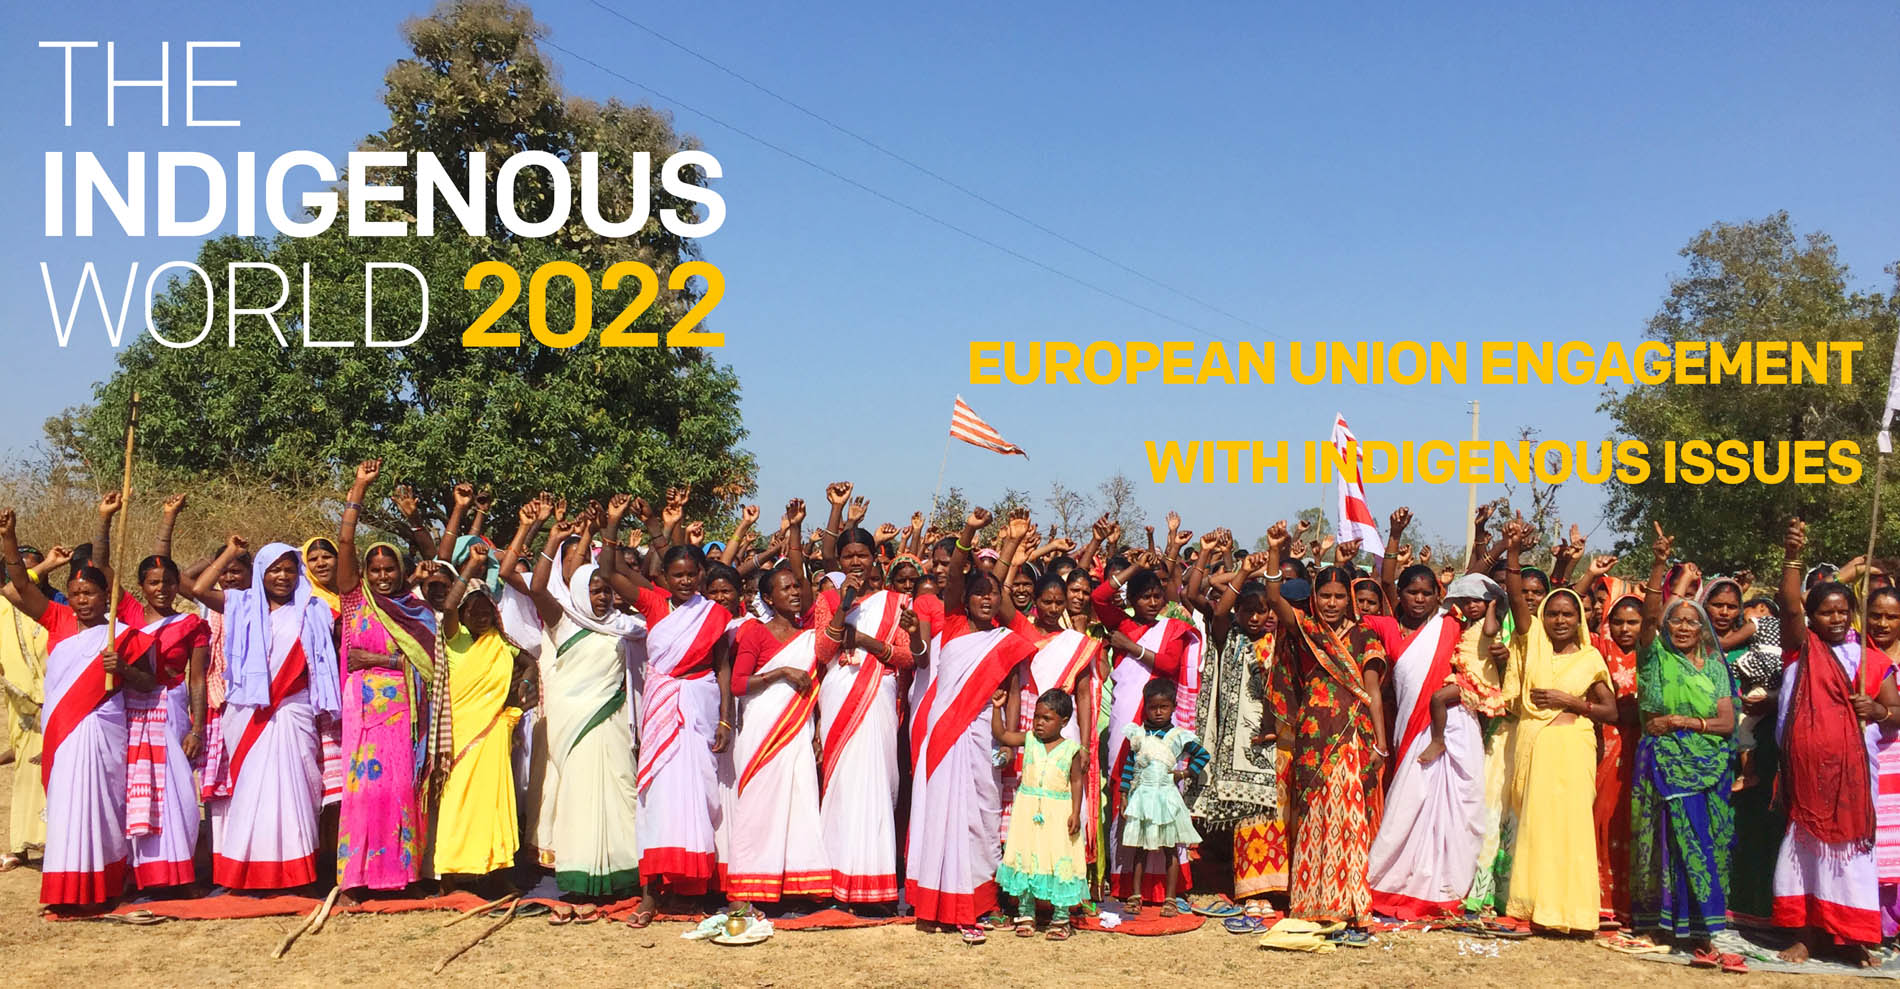 European Union Engagement with Indigenous Issues